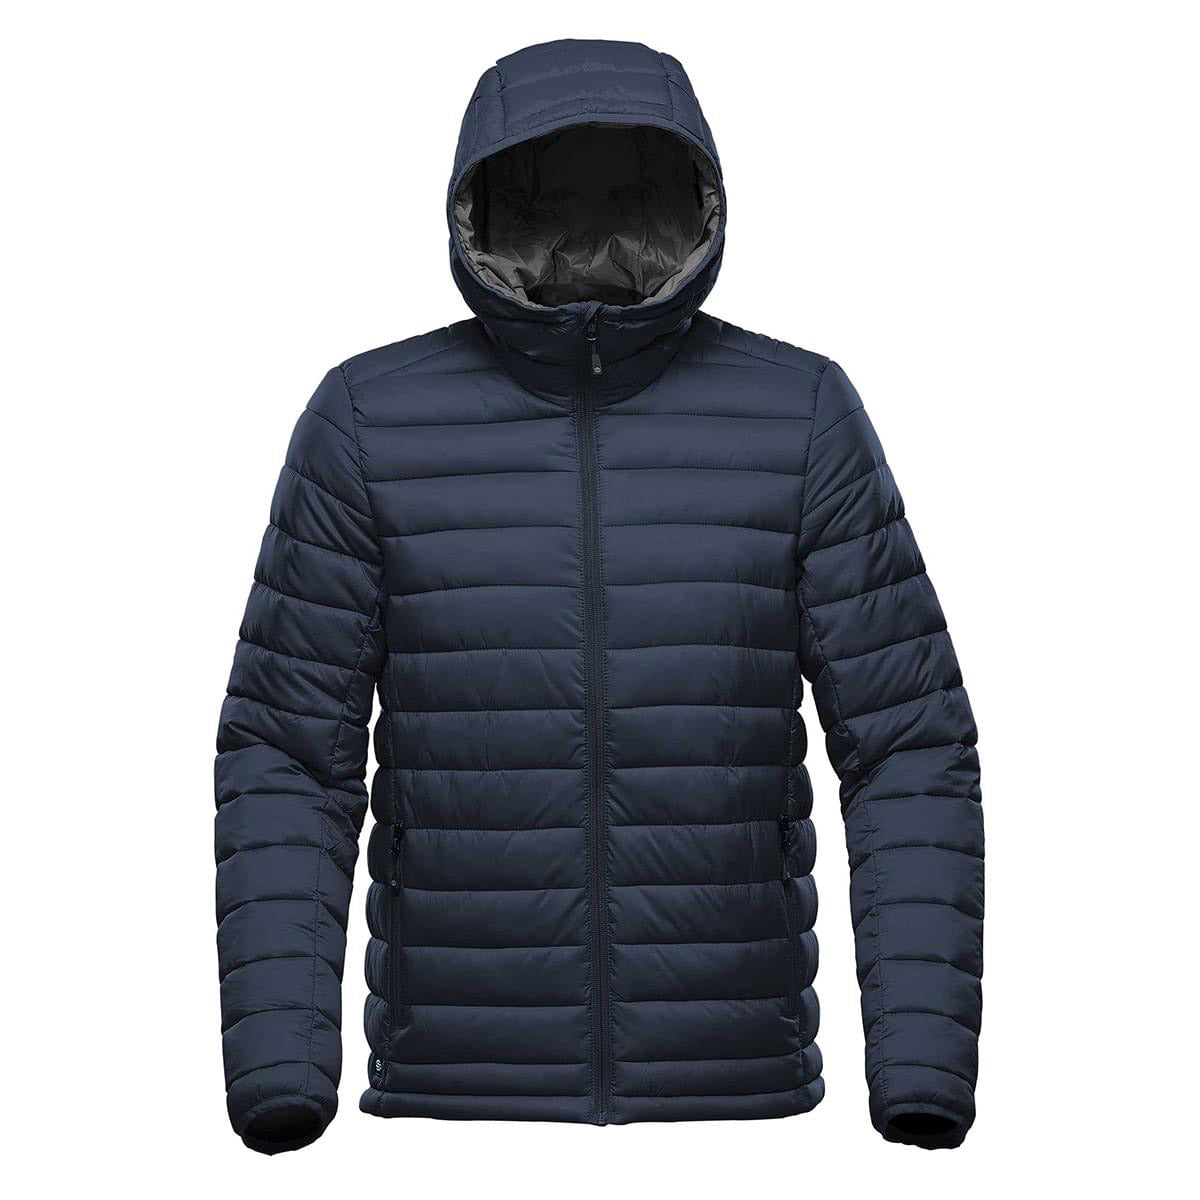 Youth's Stavanger Thermal Jacket - Stormtech USA Retail